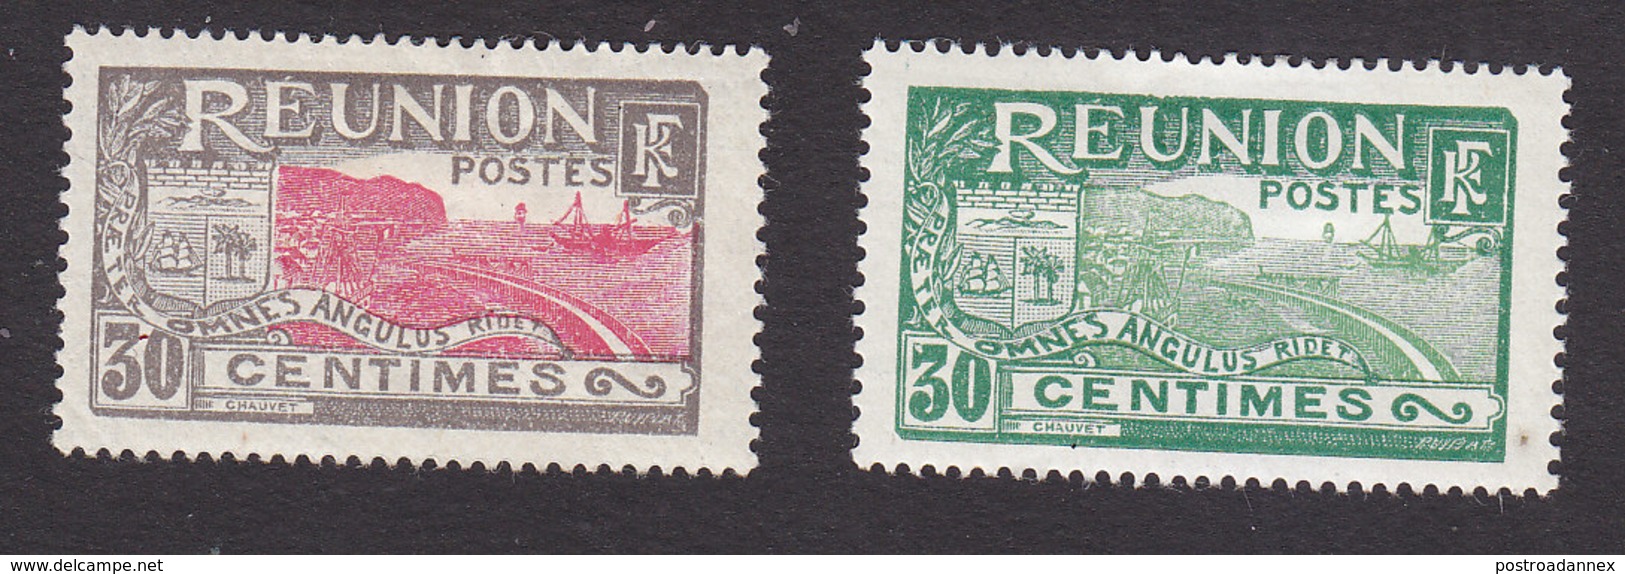 Reunion, Scott #76-77, Mint Hinged, Scenes Of Reunion, Issued 1922 - Unused Stamps